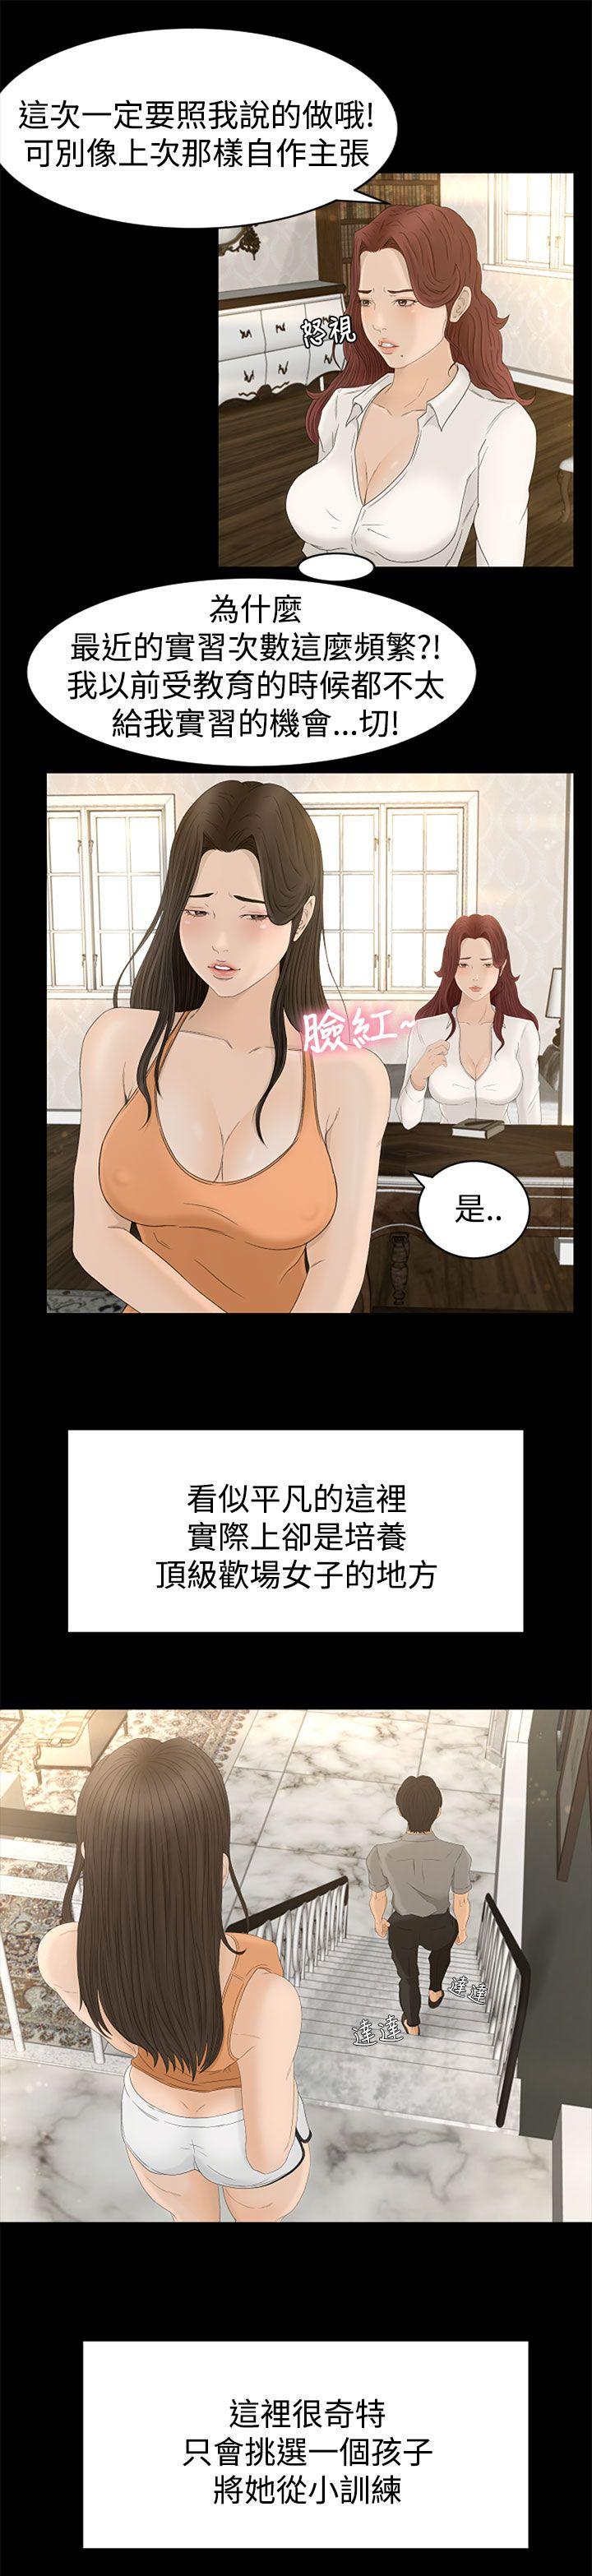 Hot Wife 猎物 第1話 [Chinese]中文 Tinytits - Page 12